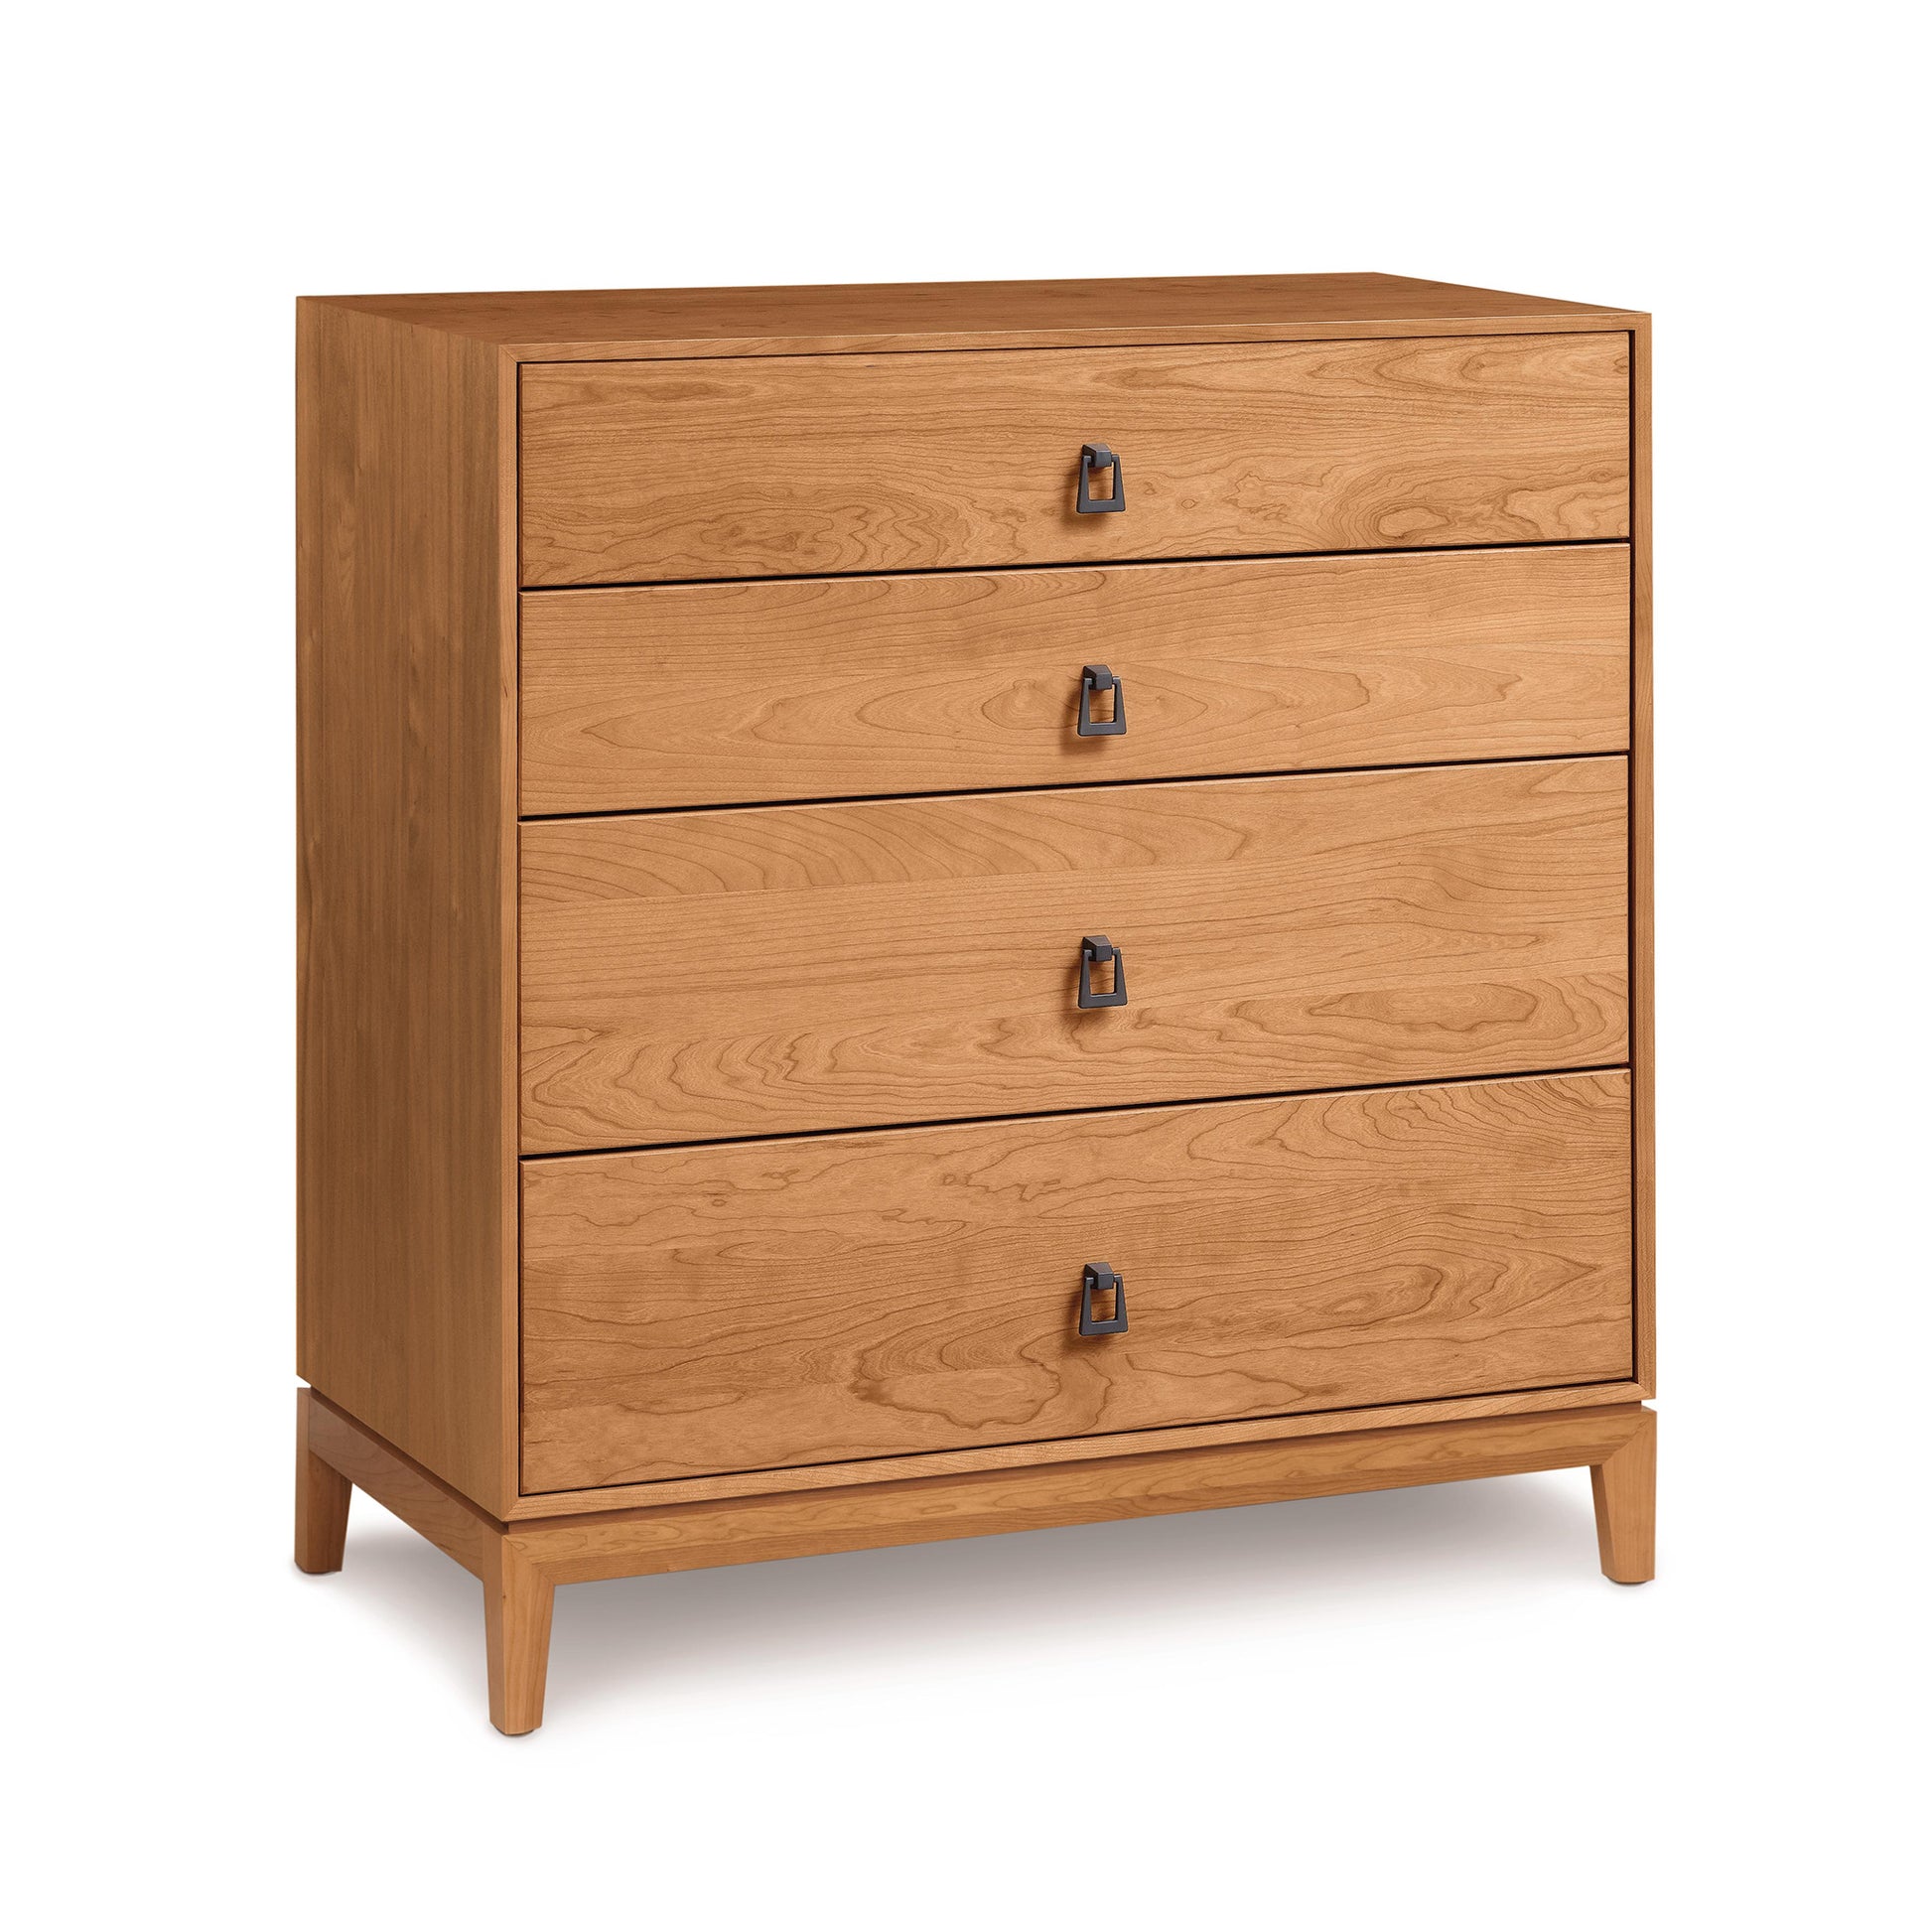 A handmade Mansfield 4-Drawer Chest by Copeland Furniture with metal handles on a white background.